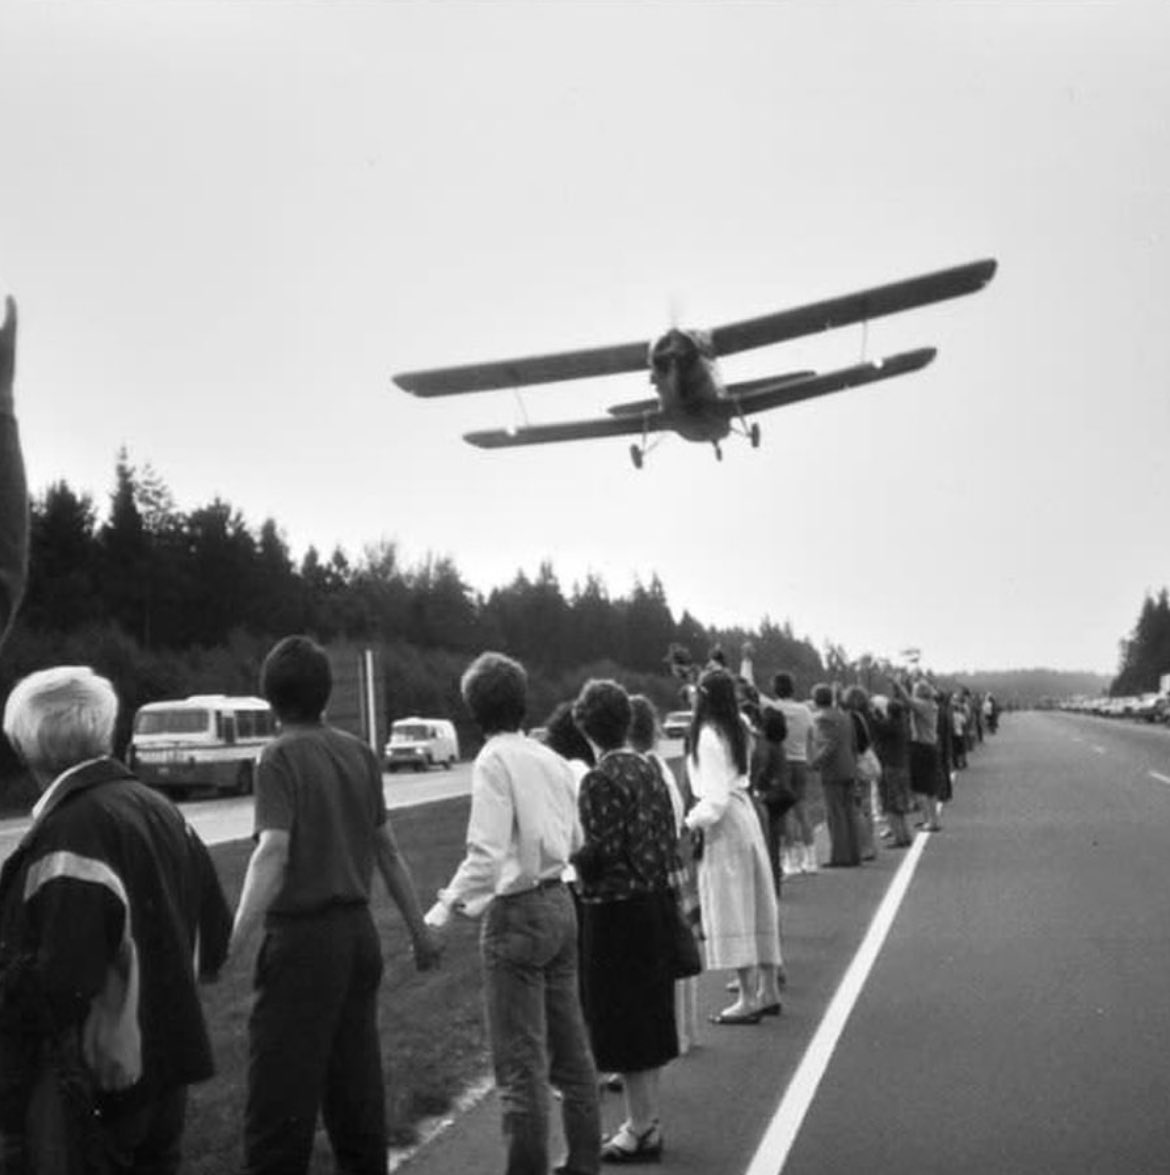 On August 23, 1989, approximately 2 million individuals from Latvia, Estonia, and Lithuania formed a human chain stretching 600 km. It served to showcase their collective desire to break free from the Soviet Union and the communist regime. Known as the Baltic Way, this peaceful